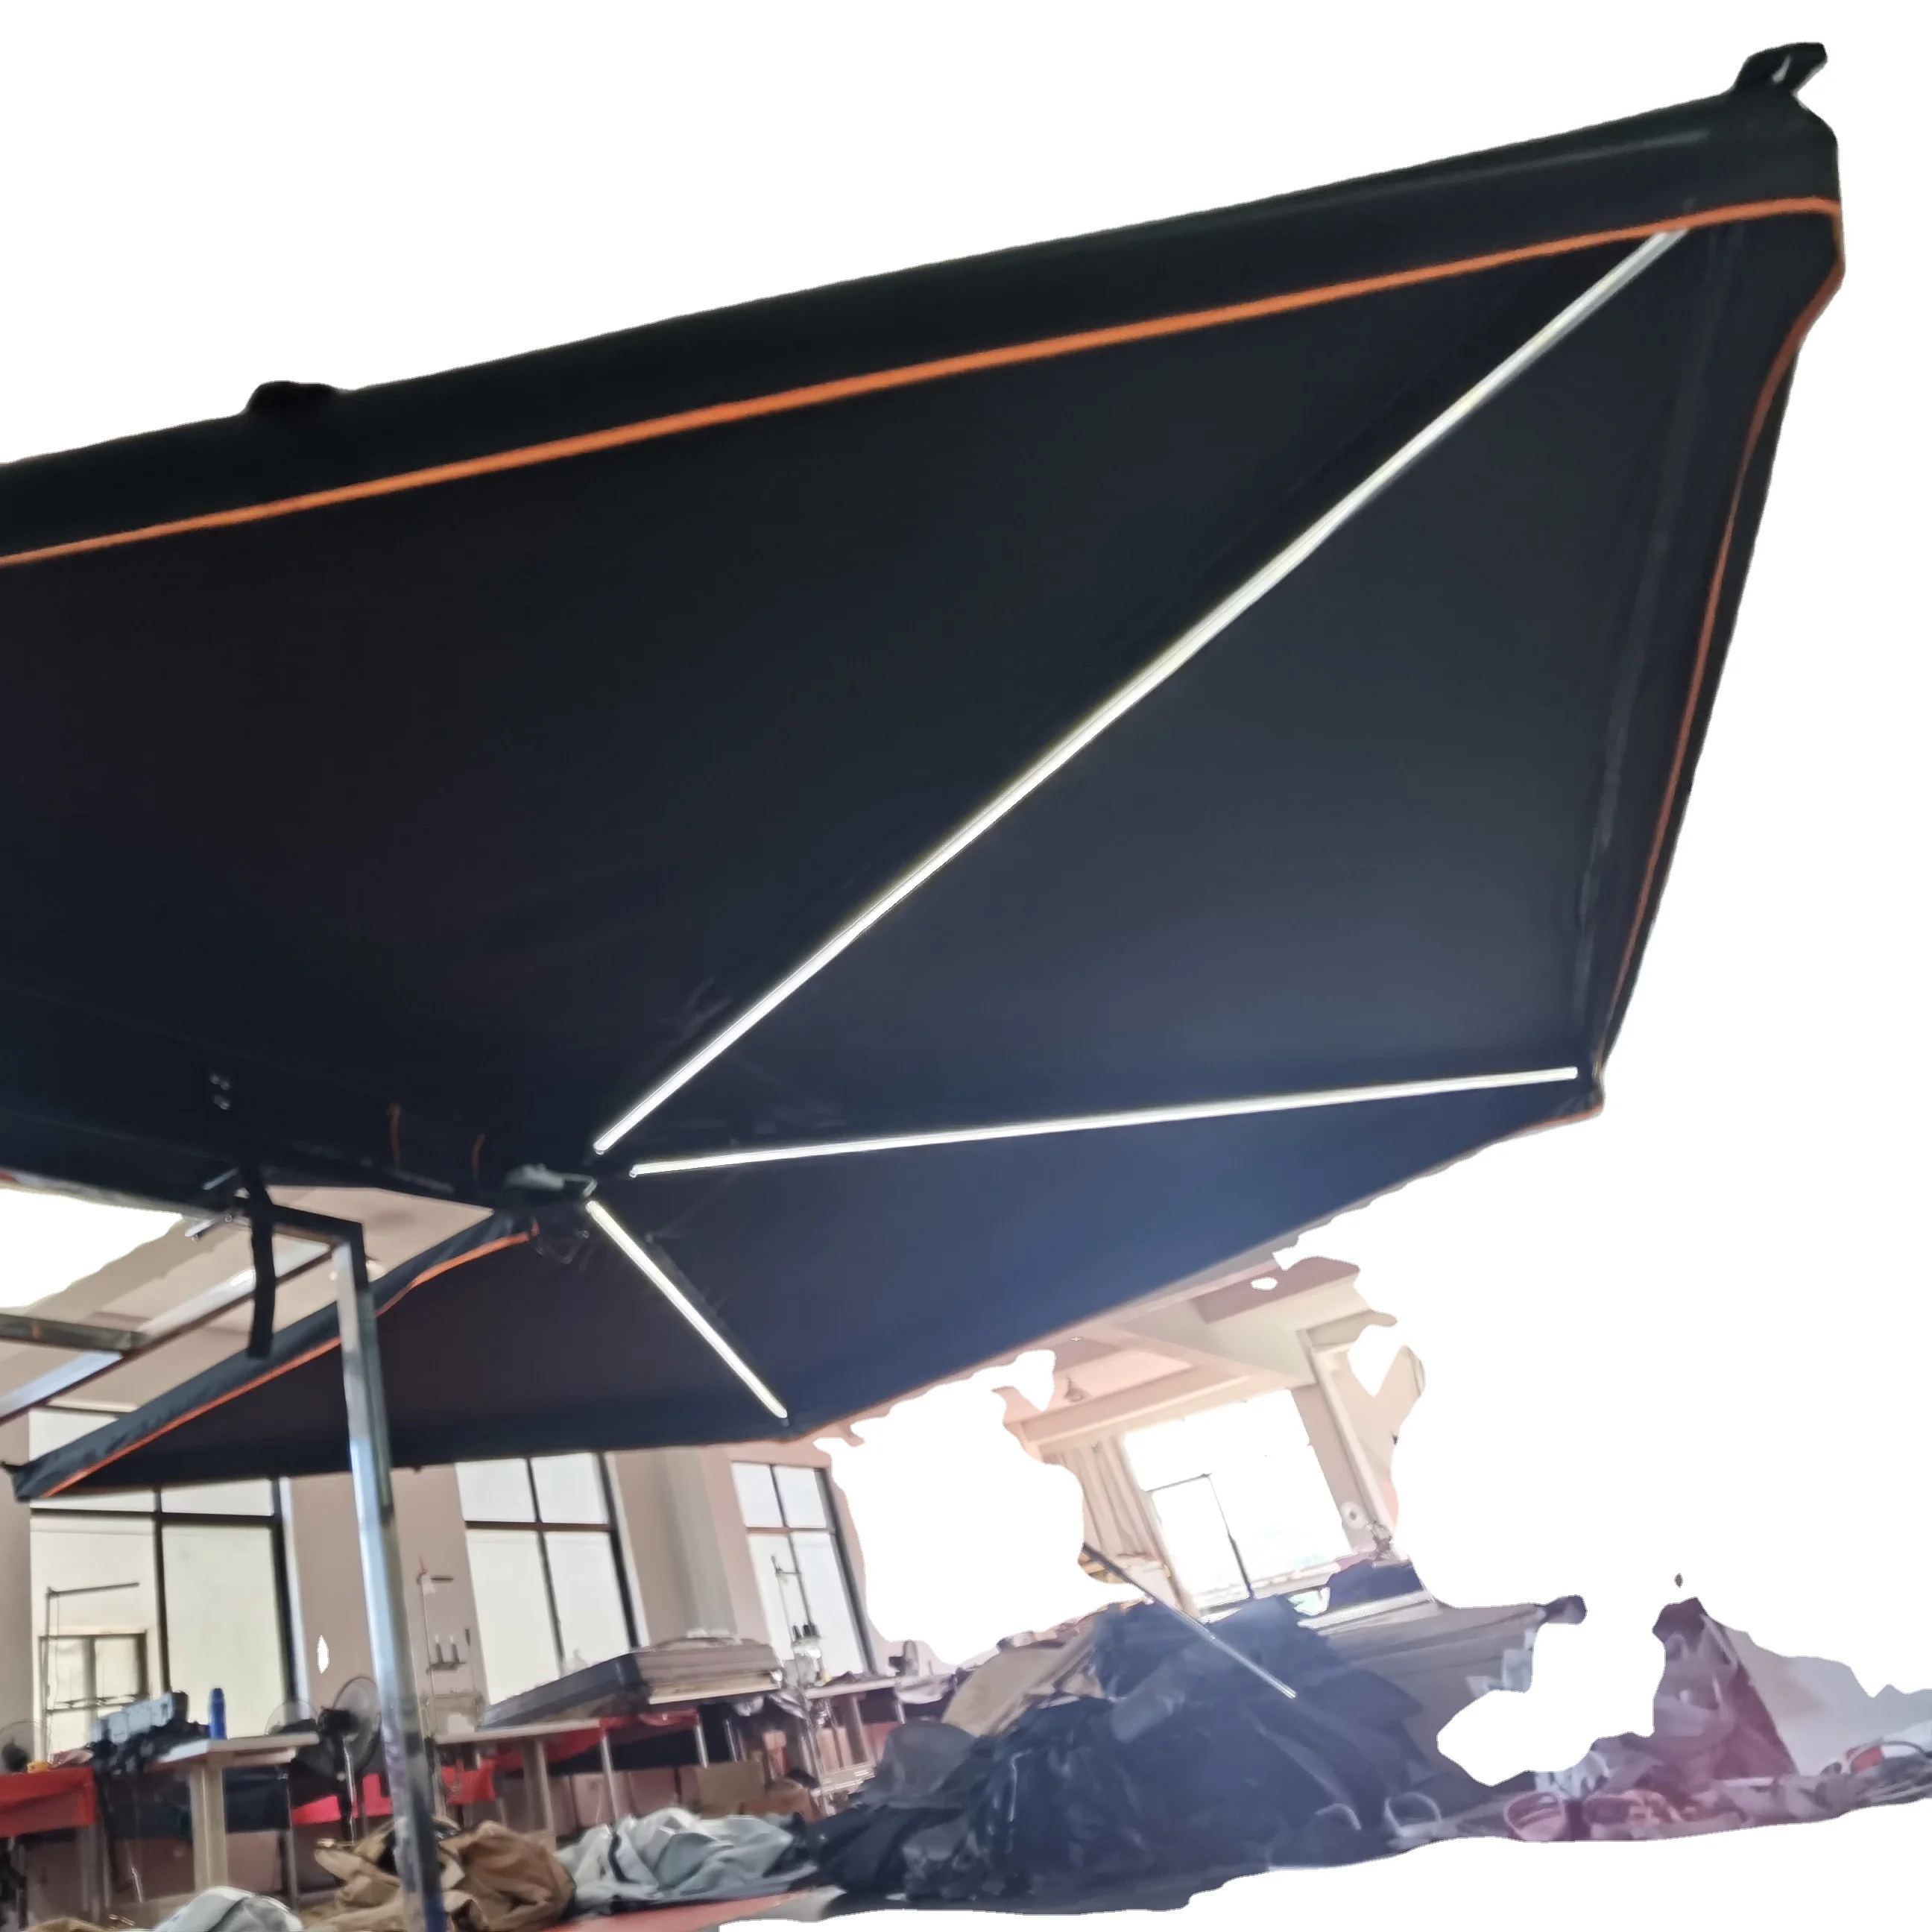 

High quality outdoor camping 270 degree awning 4x4 car tent with LED light